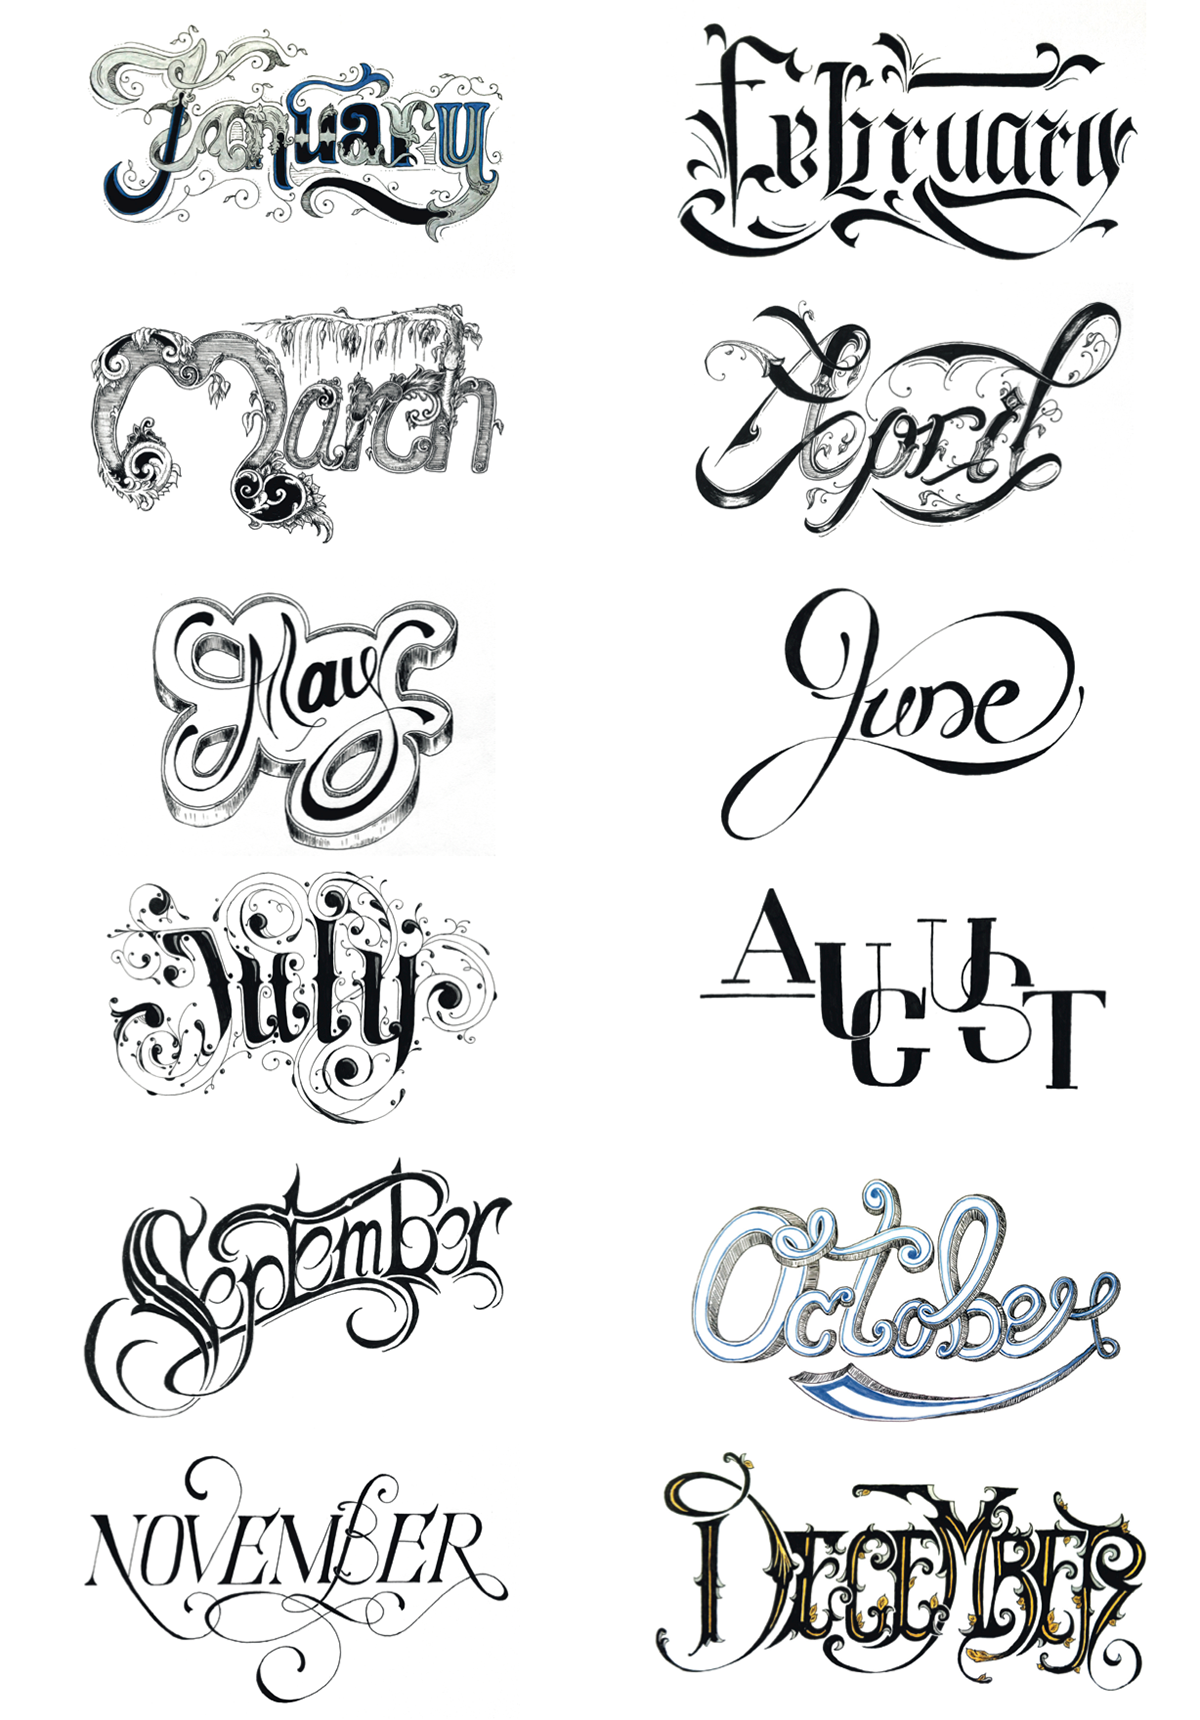 hand-drawn lettering calligraphical Style Custom calendar months inspiration ornamental